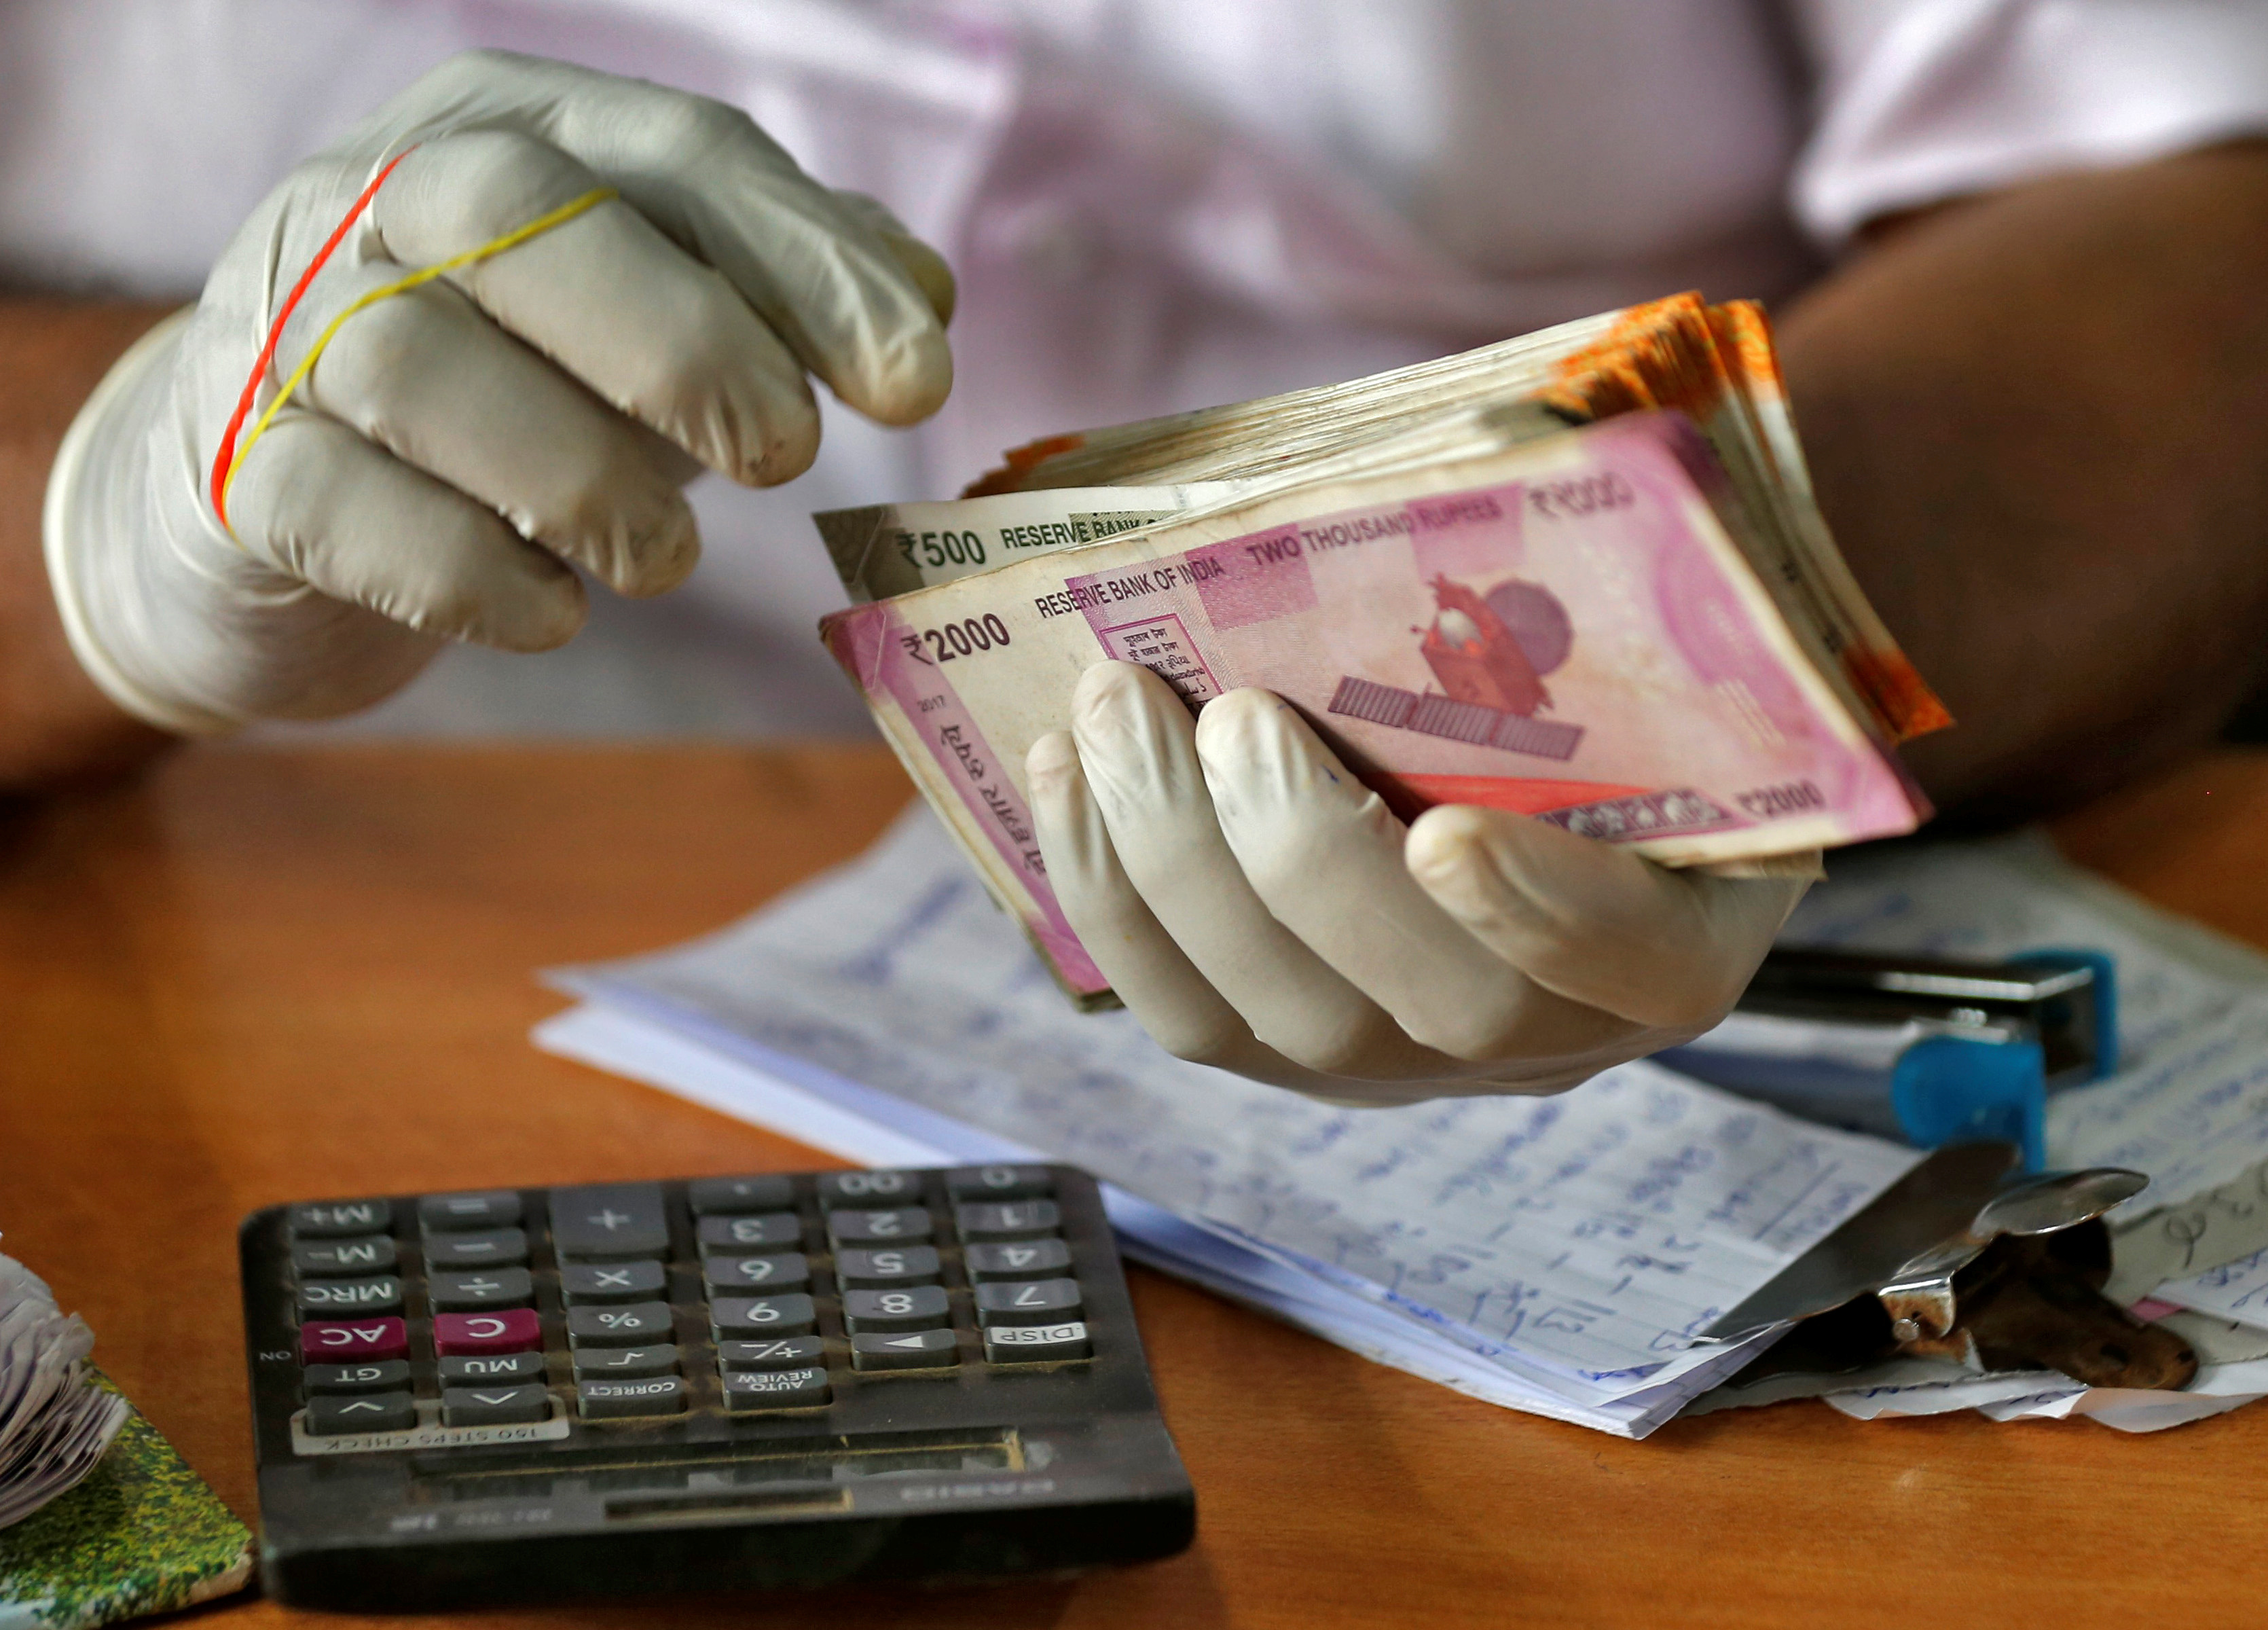 A trader wearing protective hand gloves count Indian currency notes at a market during a 21-day nationwide lockdown to limit the spreading of coronavirus disease (COVID-19) in Kochi